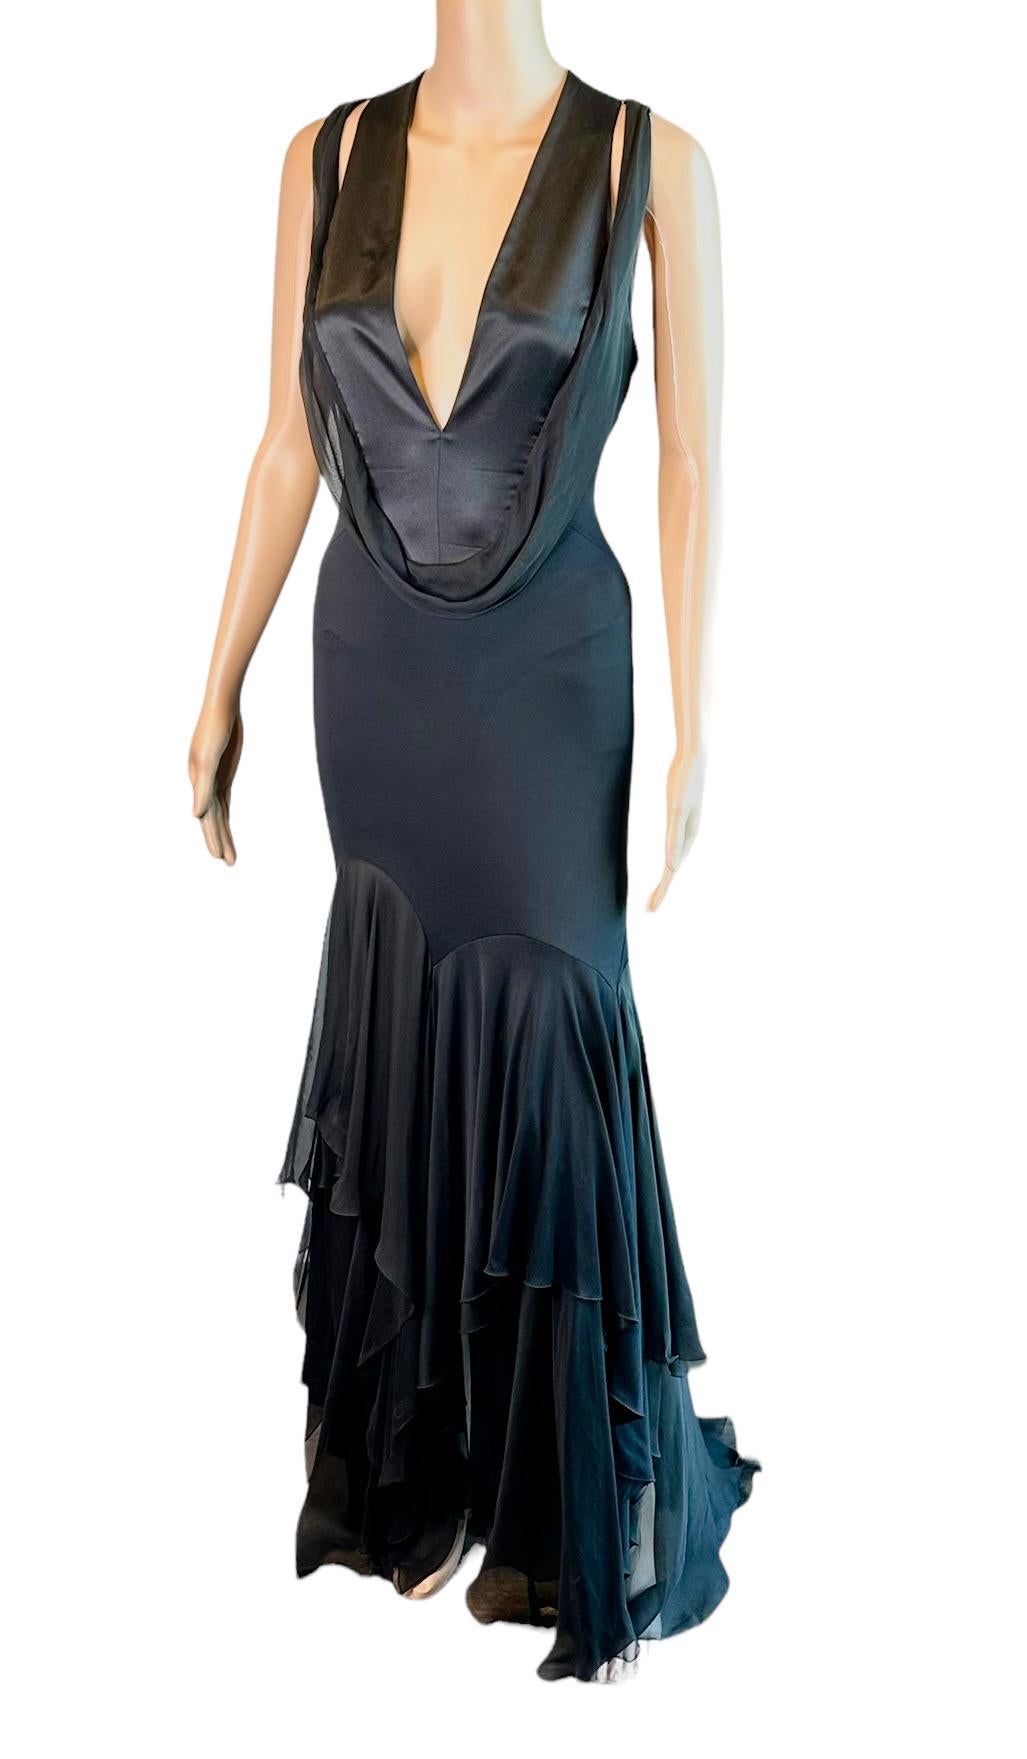 Versace S/S 2004 Plunged Halter Open Back Ruffles Black Evening Dress Gown  For Sale 6